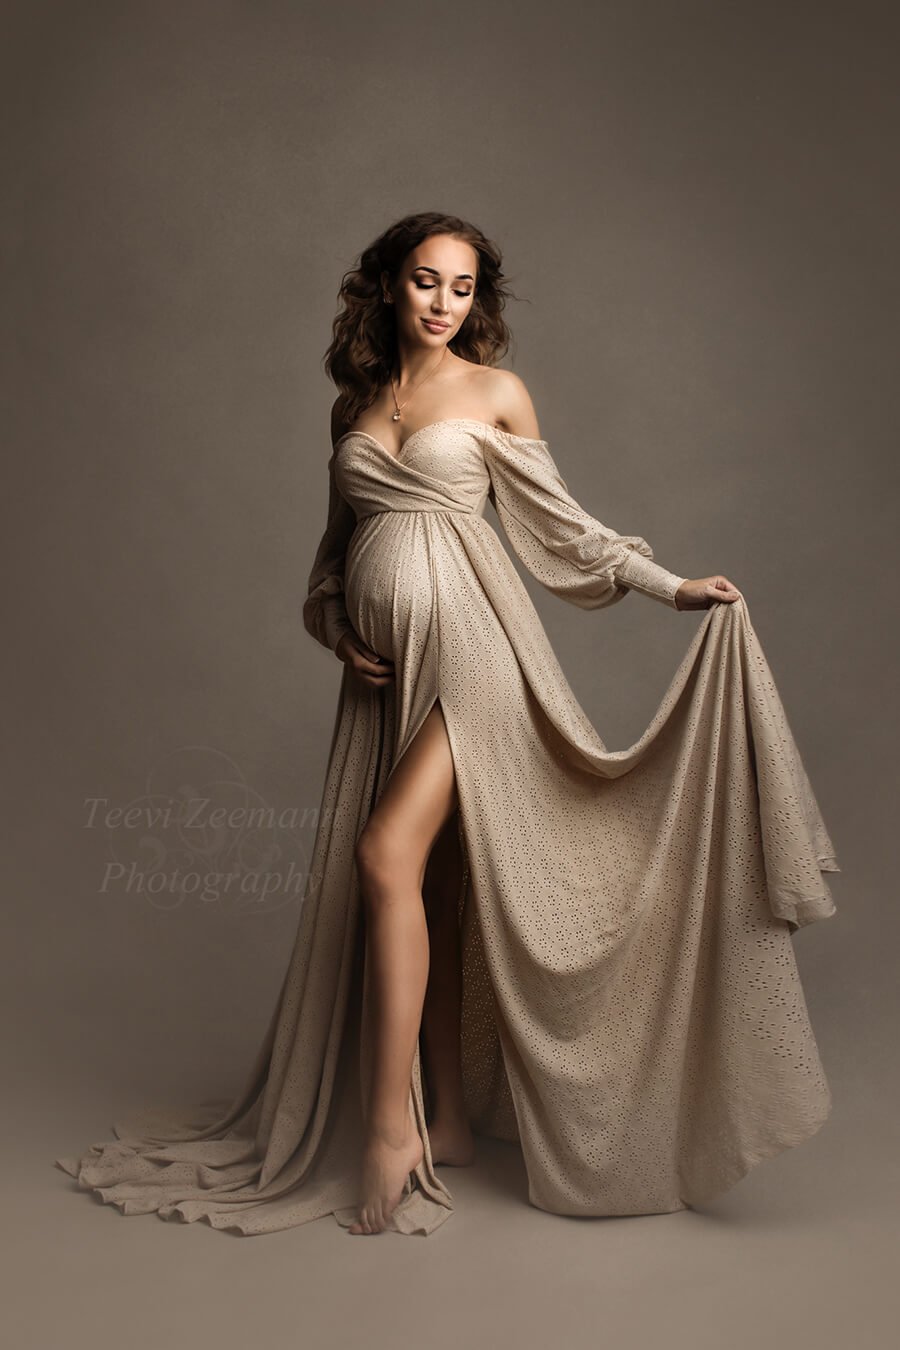 Brunette pregnant model poses in a studio for a maternity photo session. She wears a Mii-Estilo Crocus Dress in Sand that can be completely seen in the picture. The dress is made of brocante lace and features off the shoulder and adjustable sweetheart neckline. The model has her eyes closed and faces the side. She holds the skirt from the dress with one hand and her bump with the other.